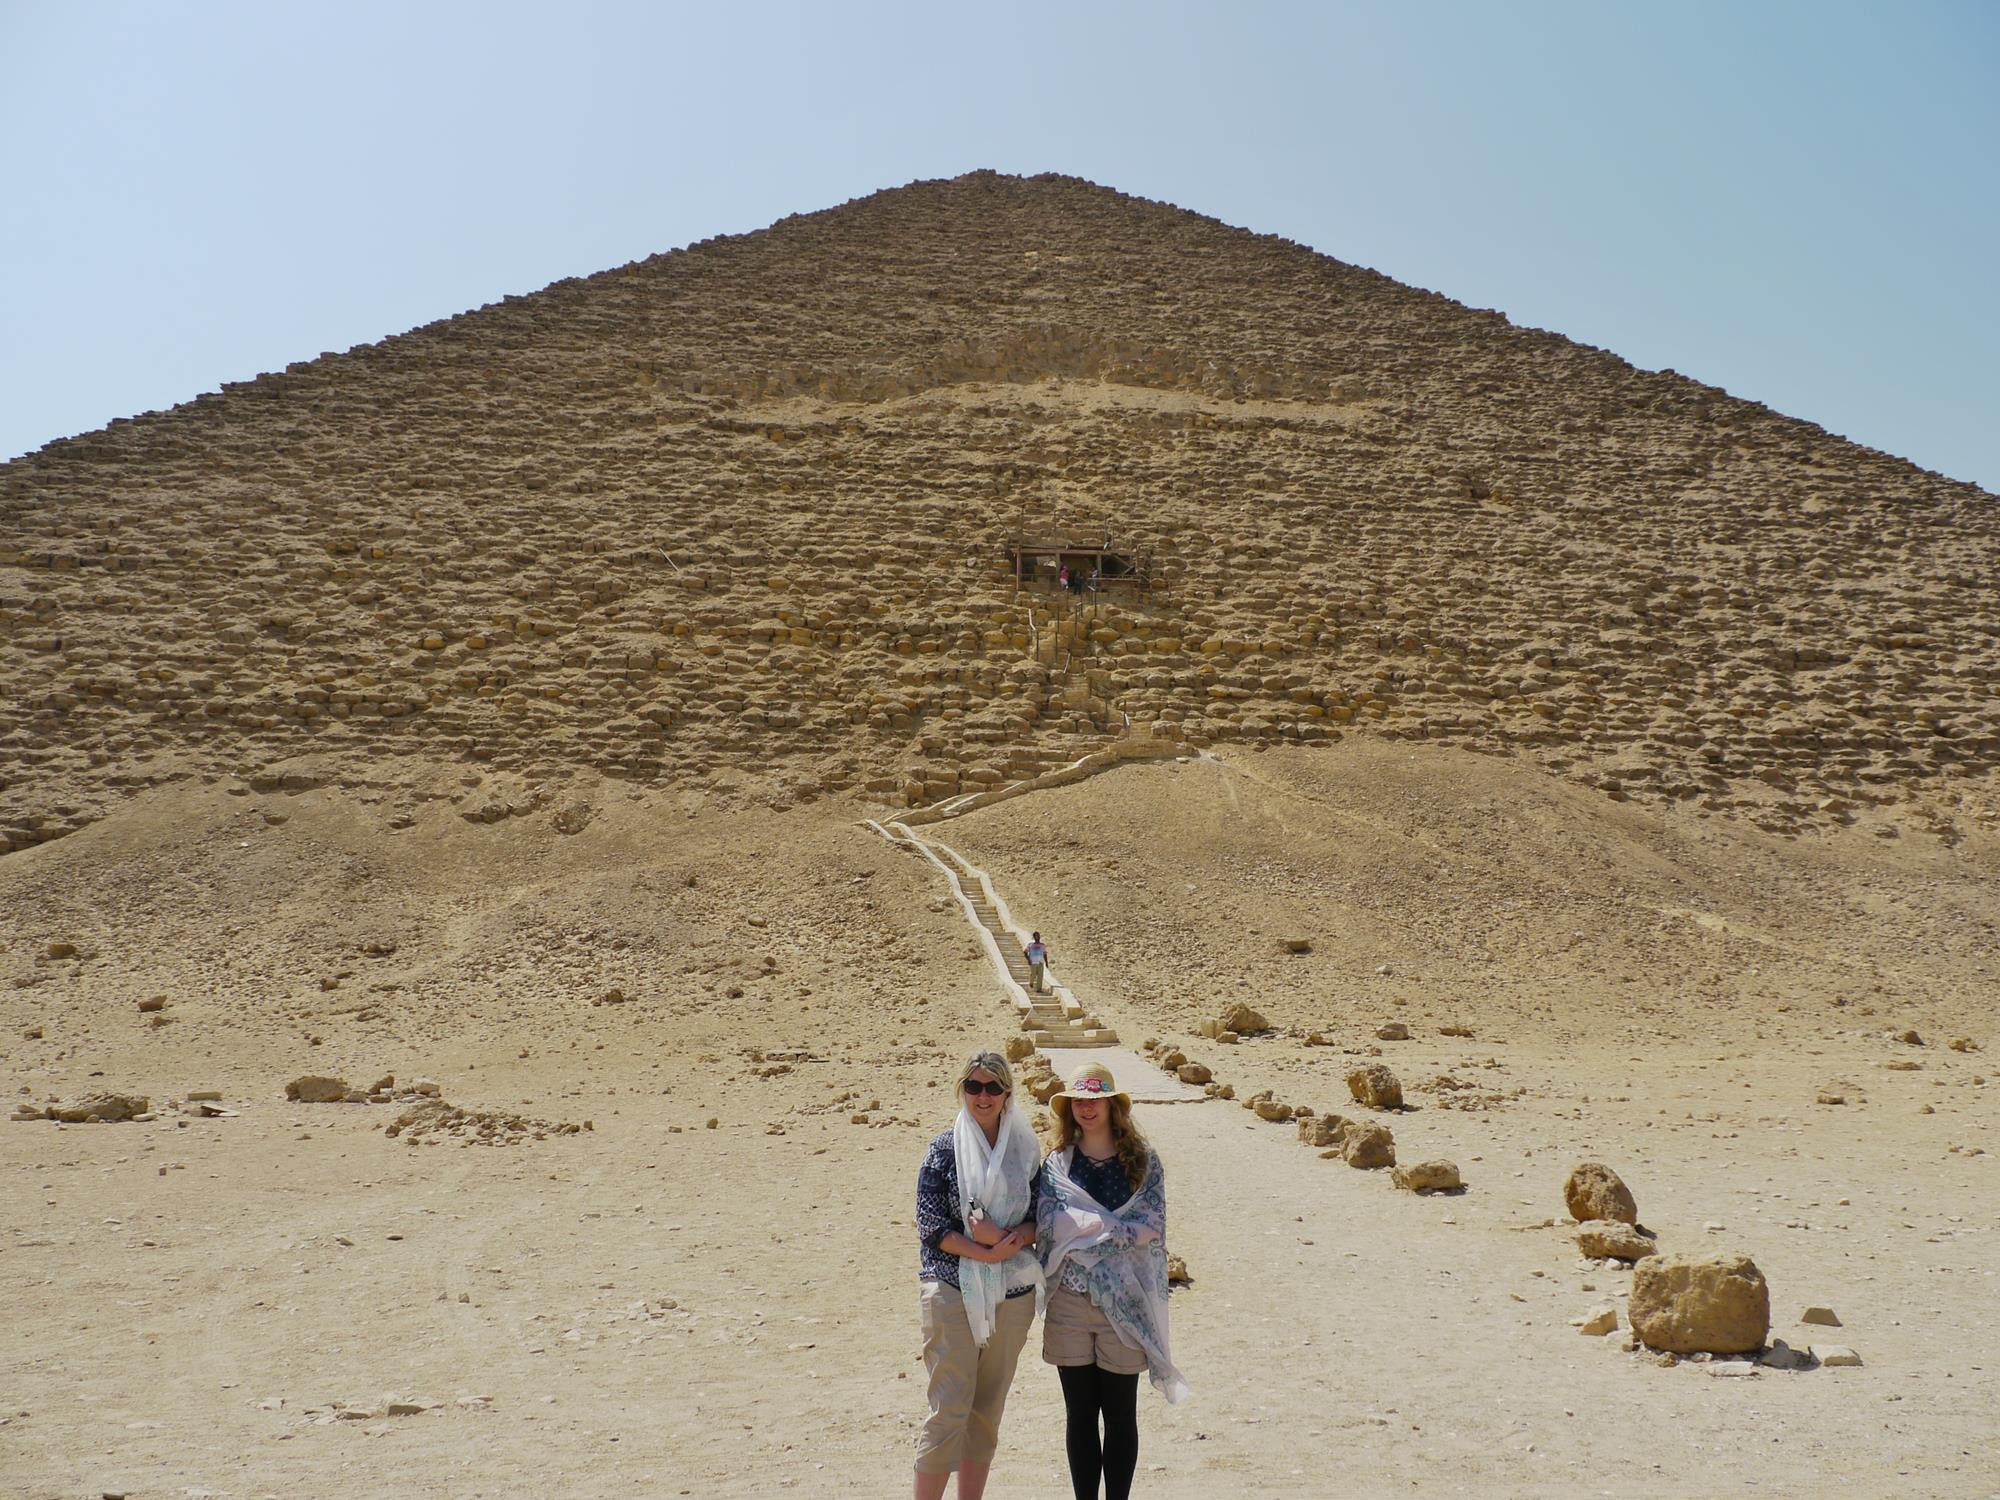 The Red Pyramid, also by Sneferu, was Egypt's first smooth-sided pyramid. Some believe Sneferu's tomb is still hidden inside. We looked inside but couldn't find it 